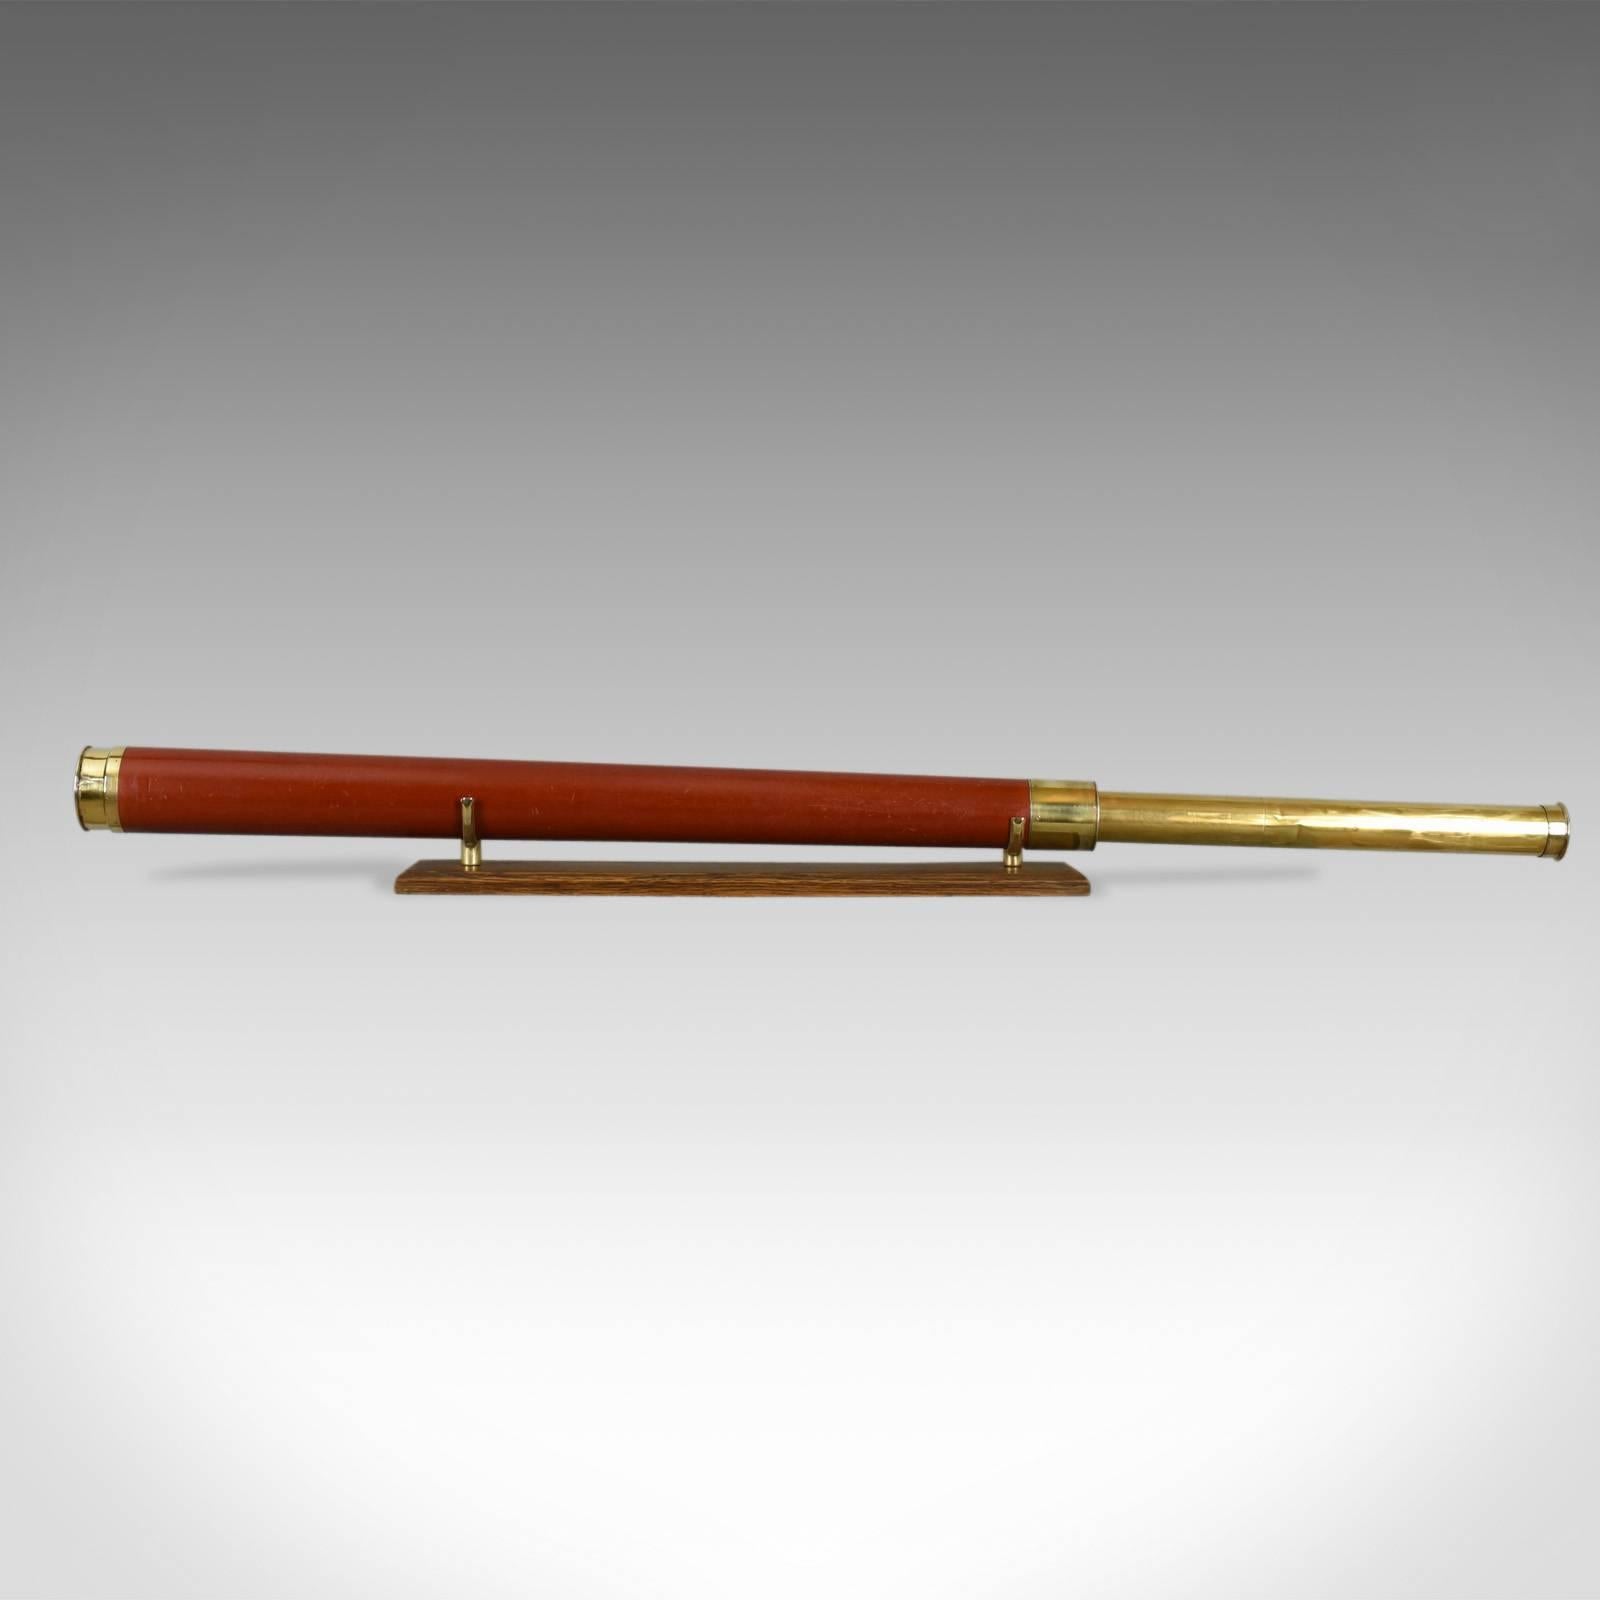 This is an antique telescope, a large single draw refractor for terrestrial or astronomical use. An English, late Georgian piece dating to circa 1820.

Perfect for bird watching, landscape appreciation, wildlife, or maritime observation. Equally